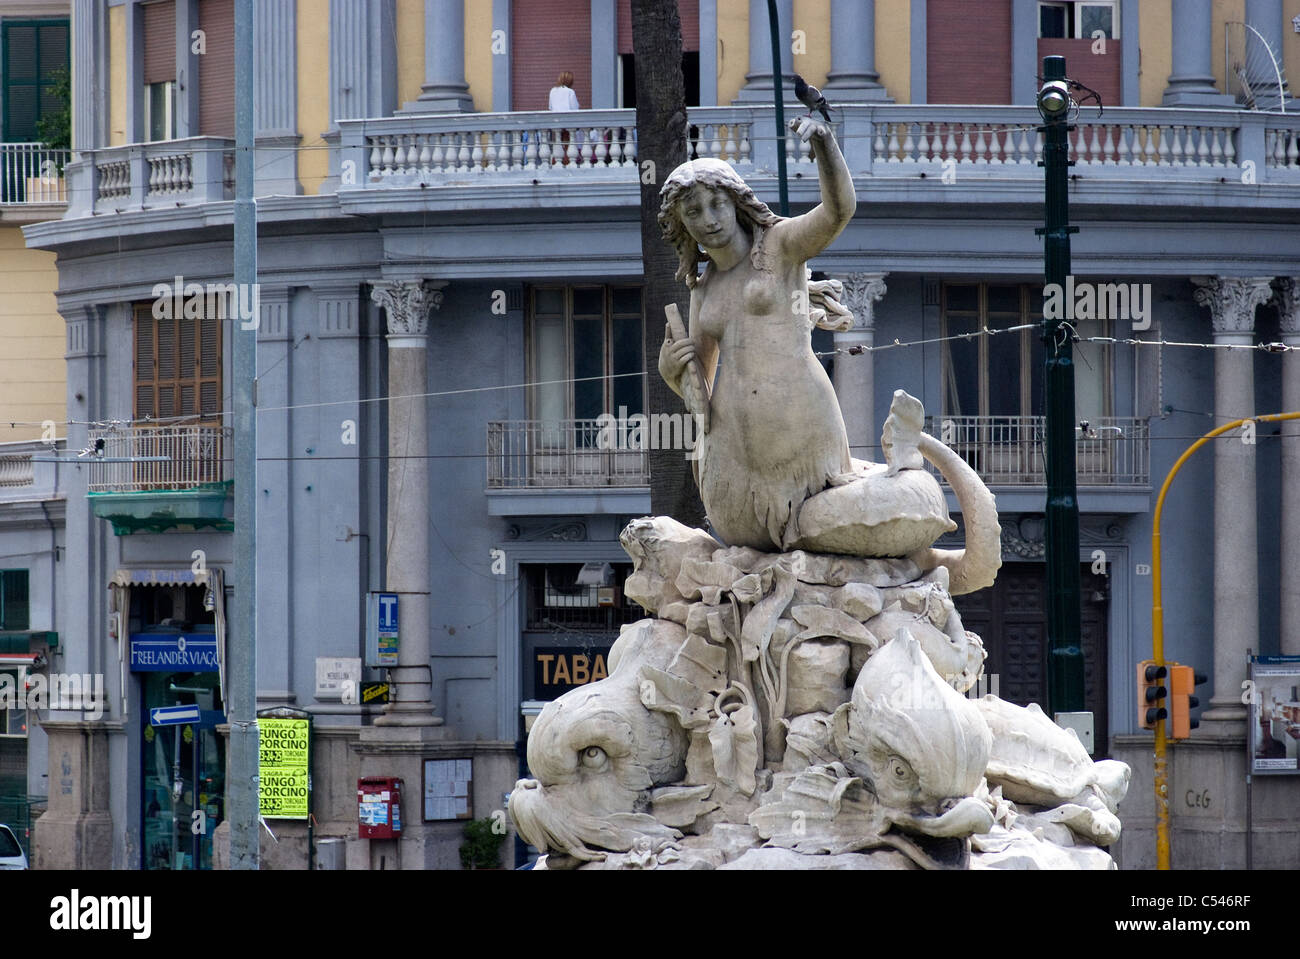 Mermaid fountain in the centre of an urban intersection, Naples, Campania, Italy Stock Photo